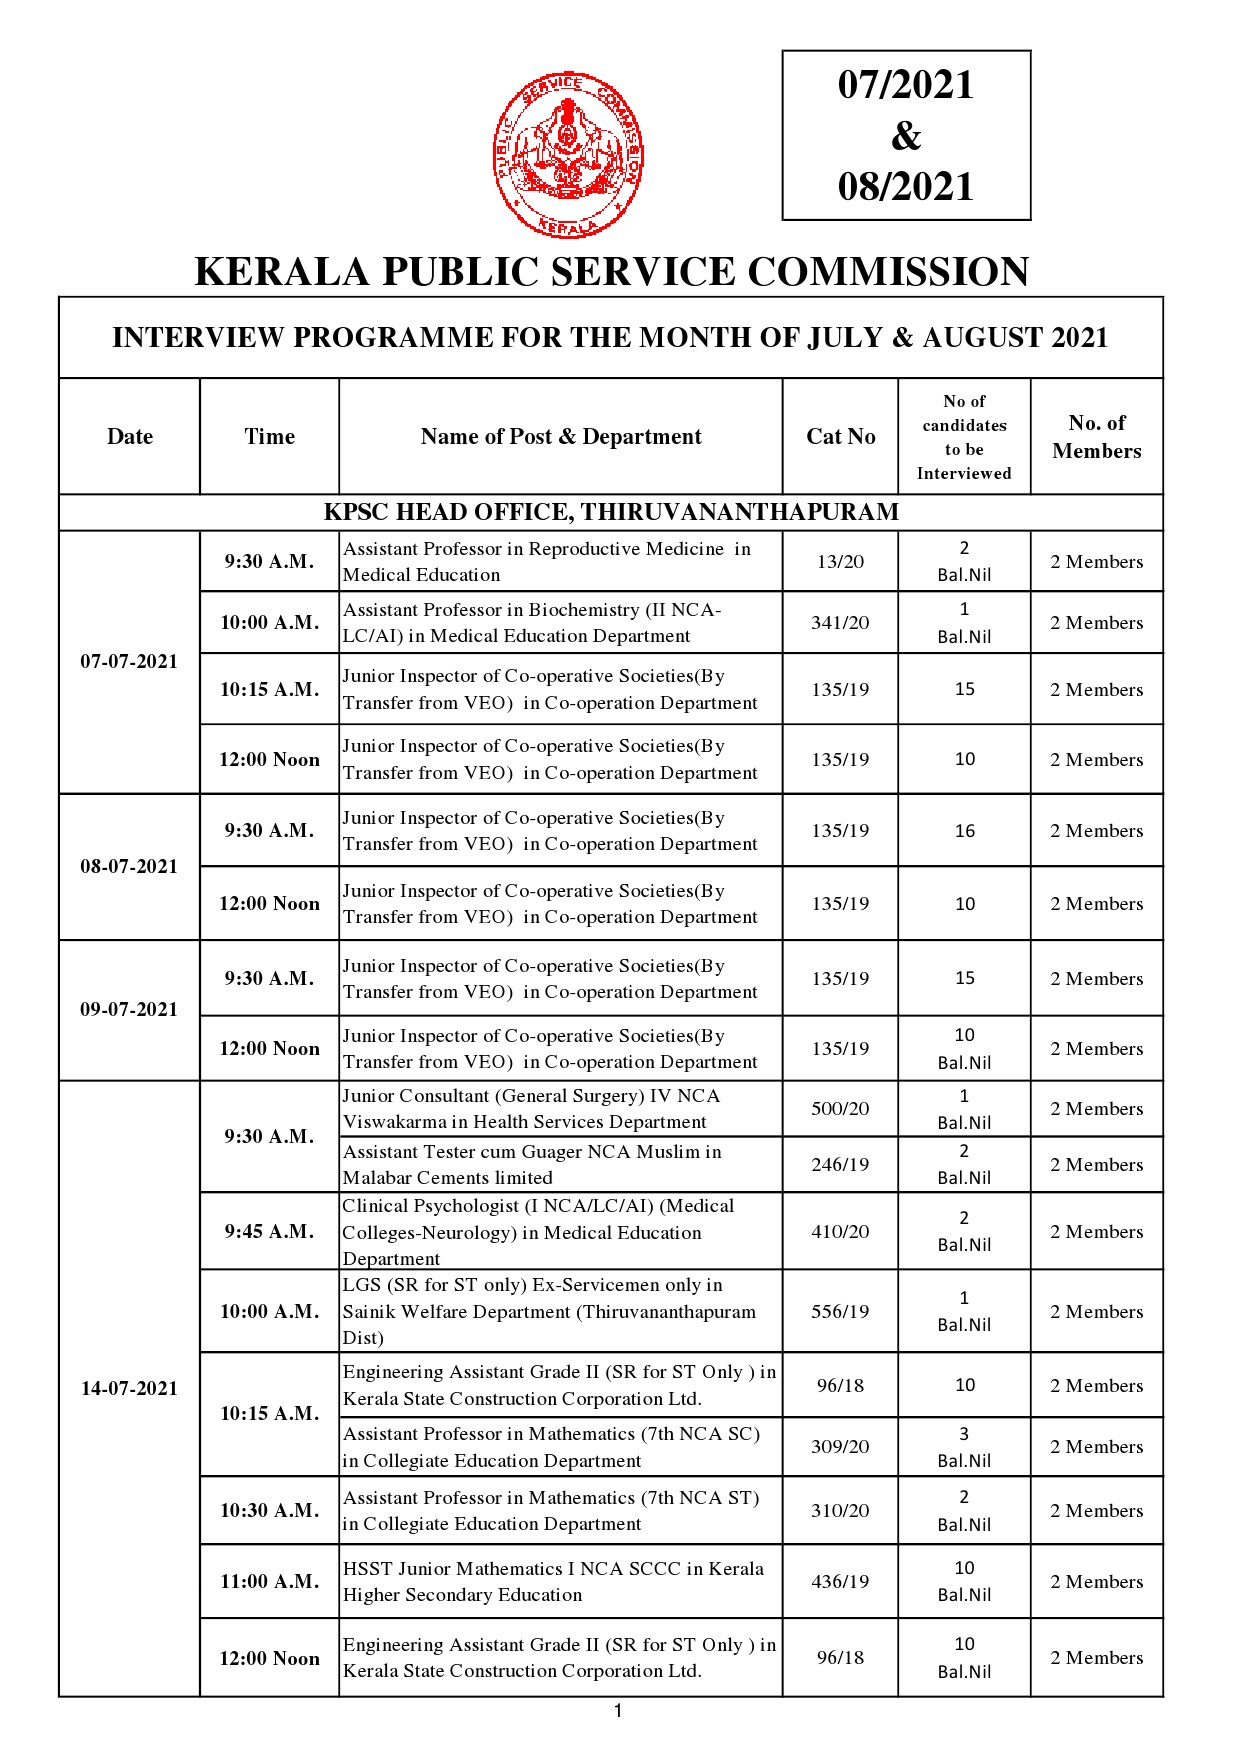 KPSC Interview Programme Of July And August 2021 - Notification Image 1